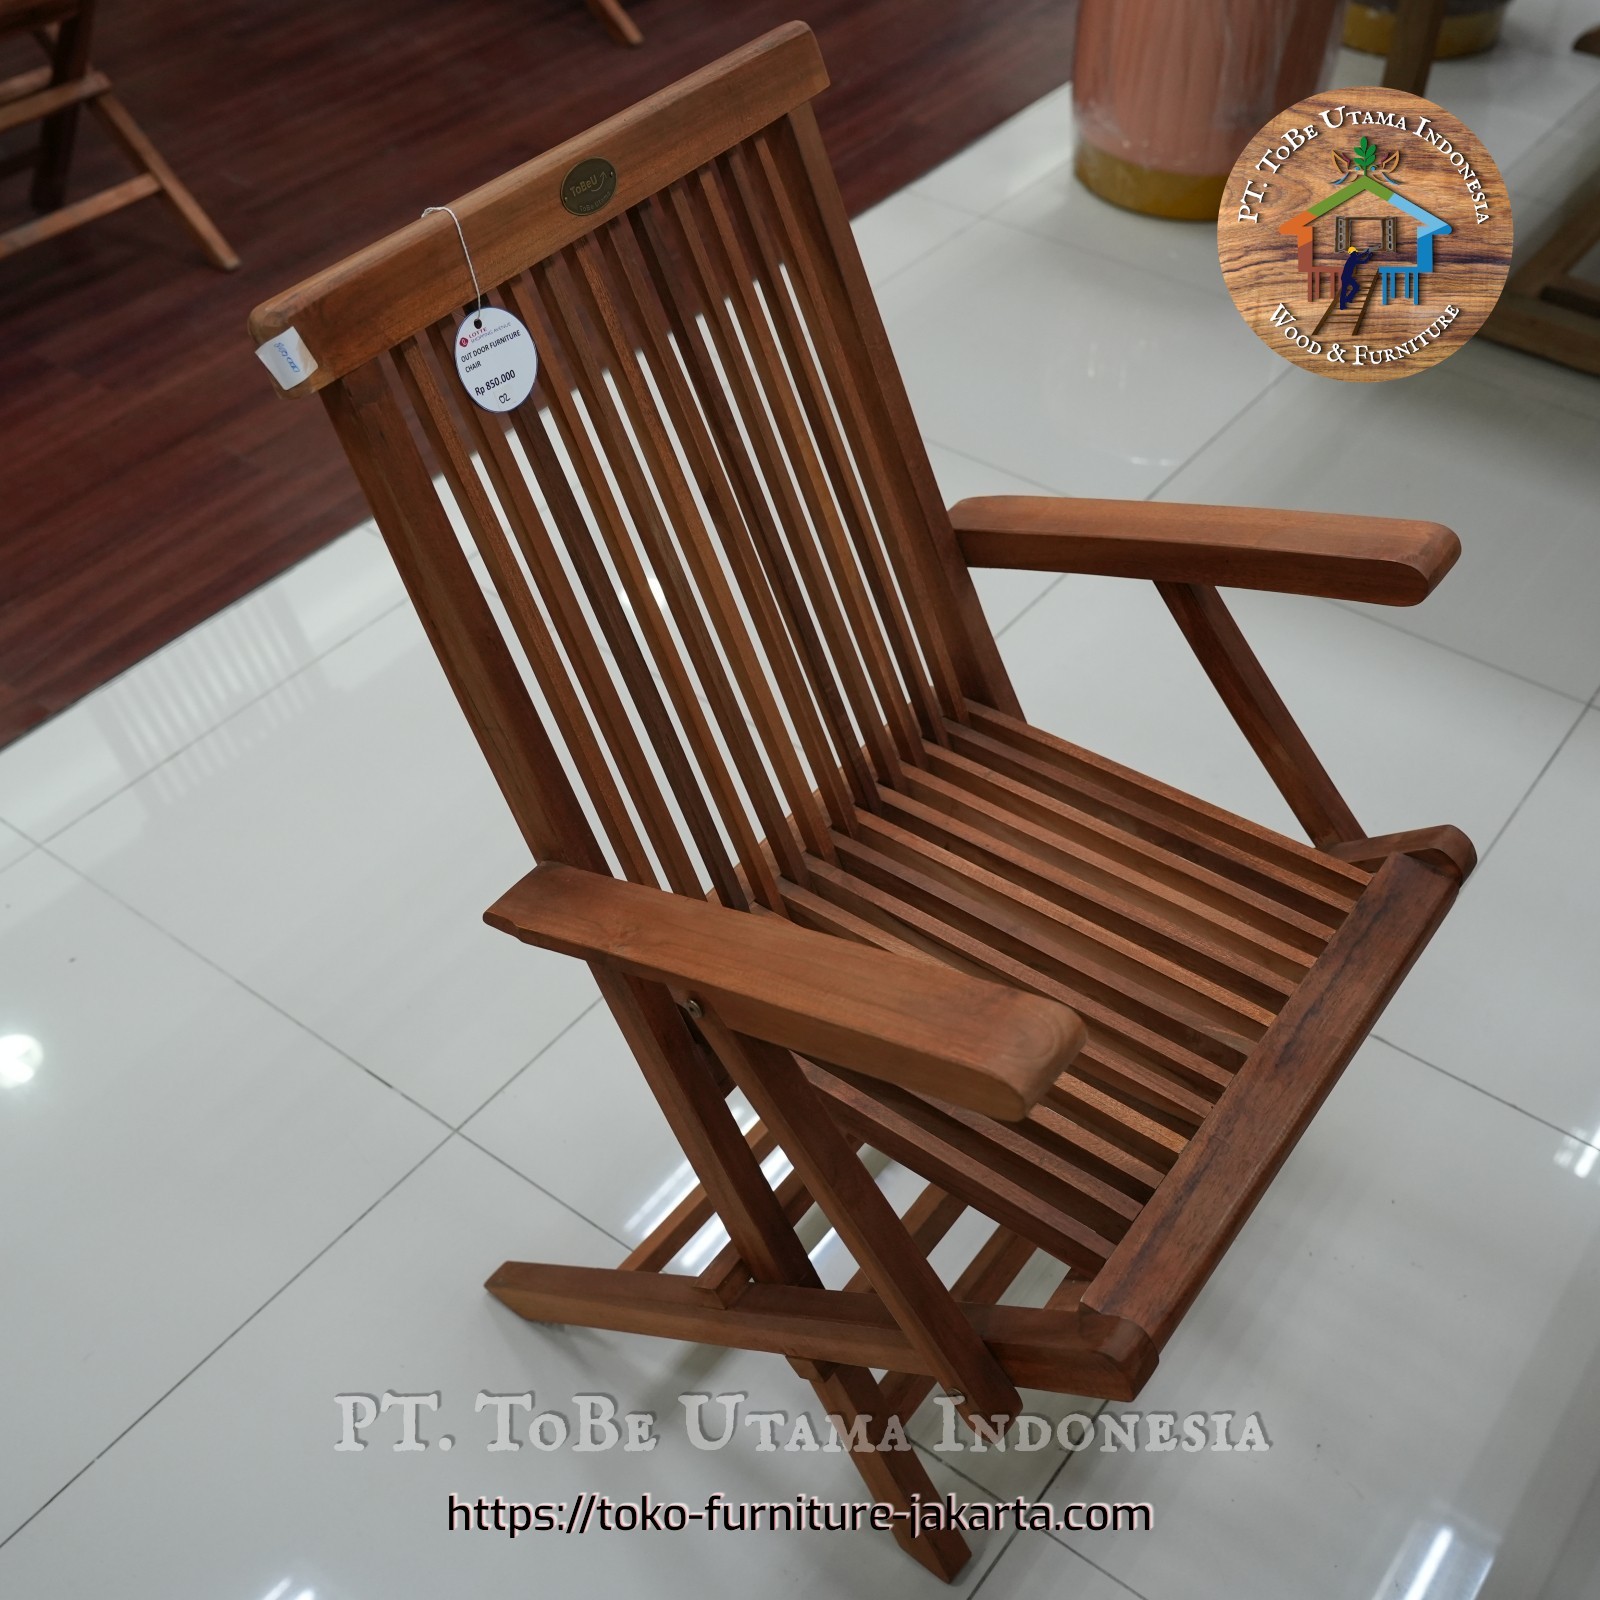 Garden - Teak: Folding Chairs With Arms made of teakwood (image 1 of 17).